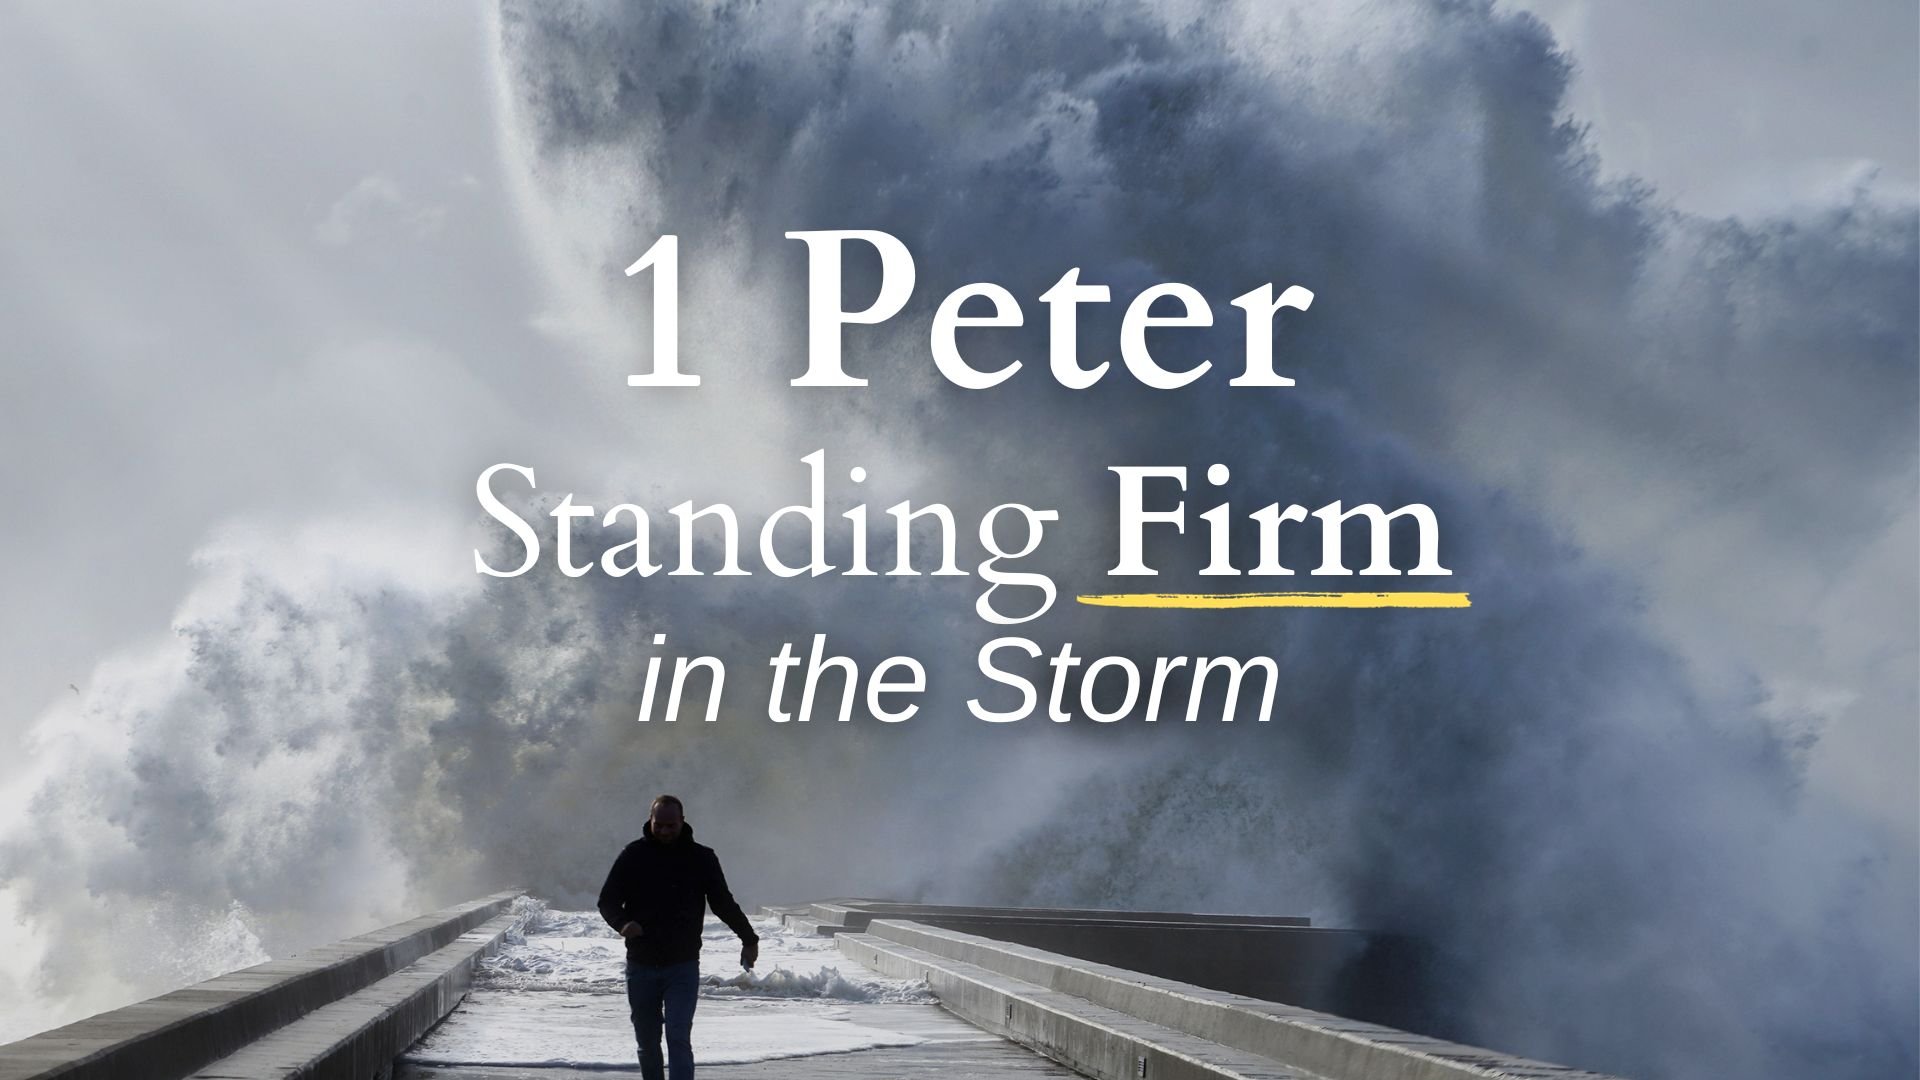 1 Peter Standing Firm in the Storm YT Thumbnail.jpg